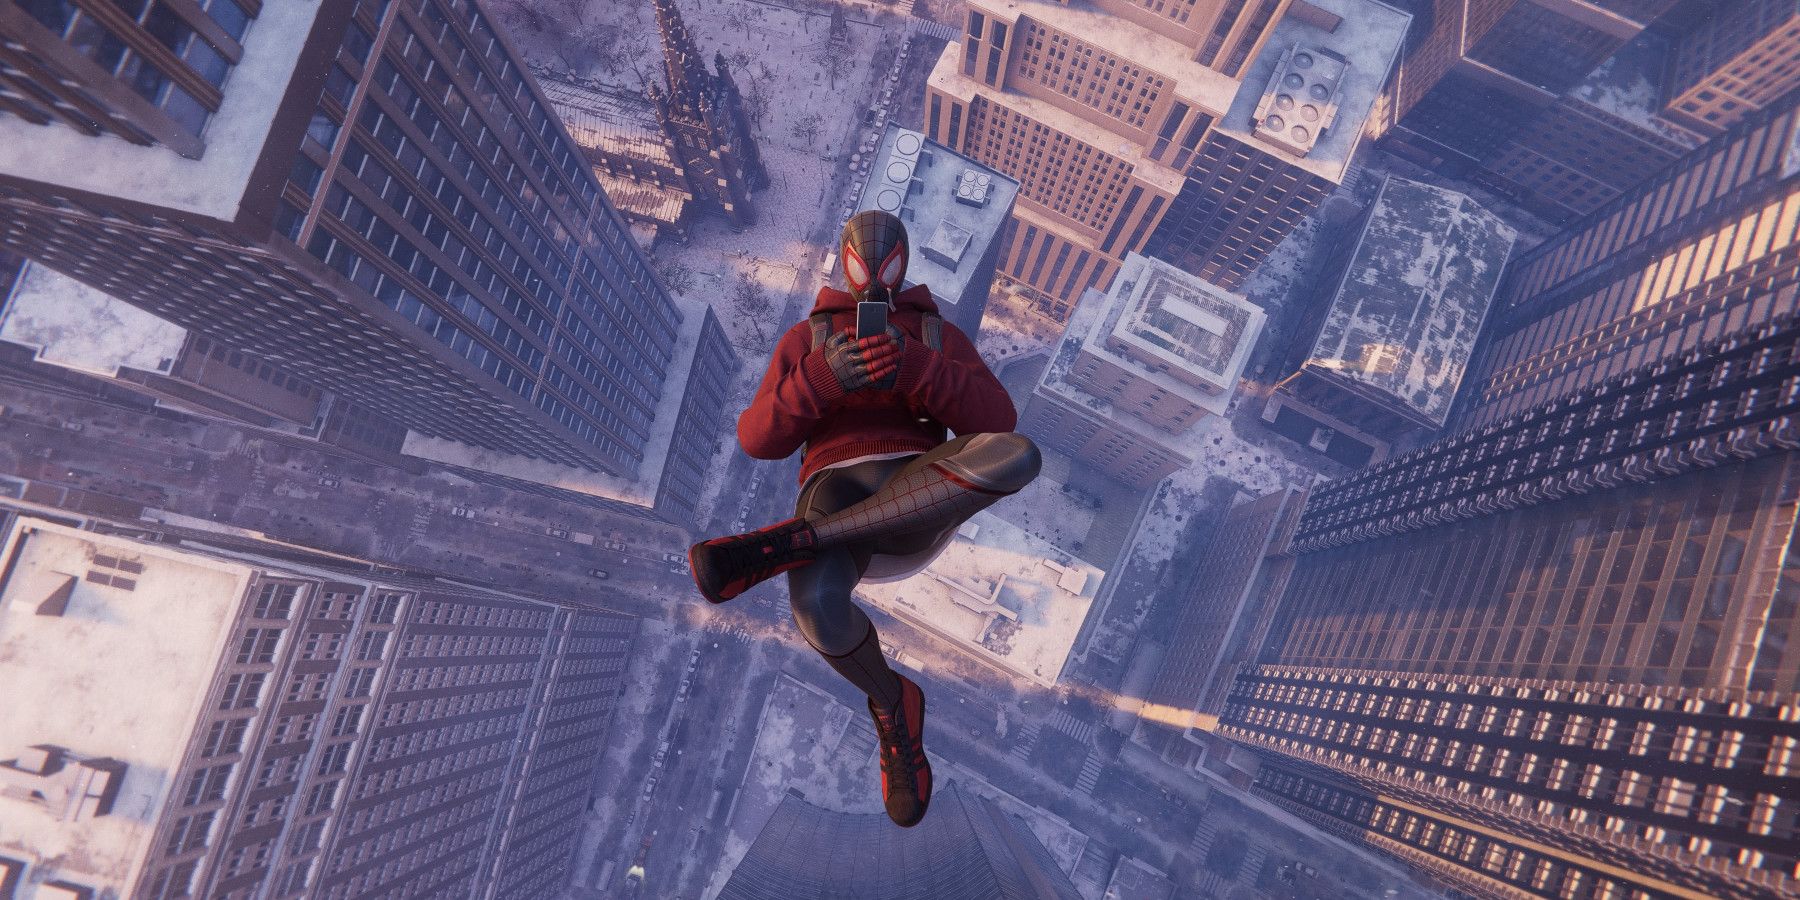 Miles Morales playing on his phone while plummeting to the ground